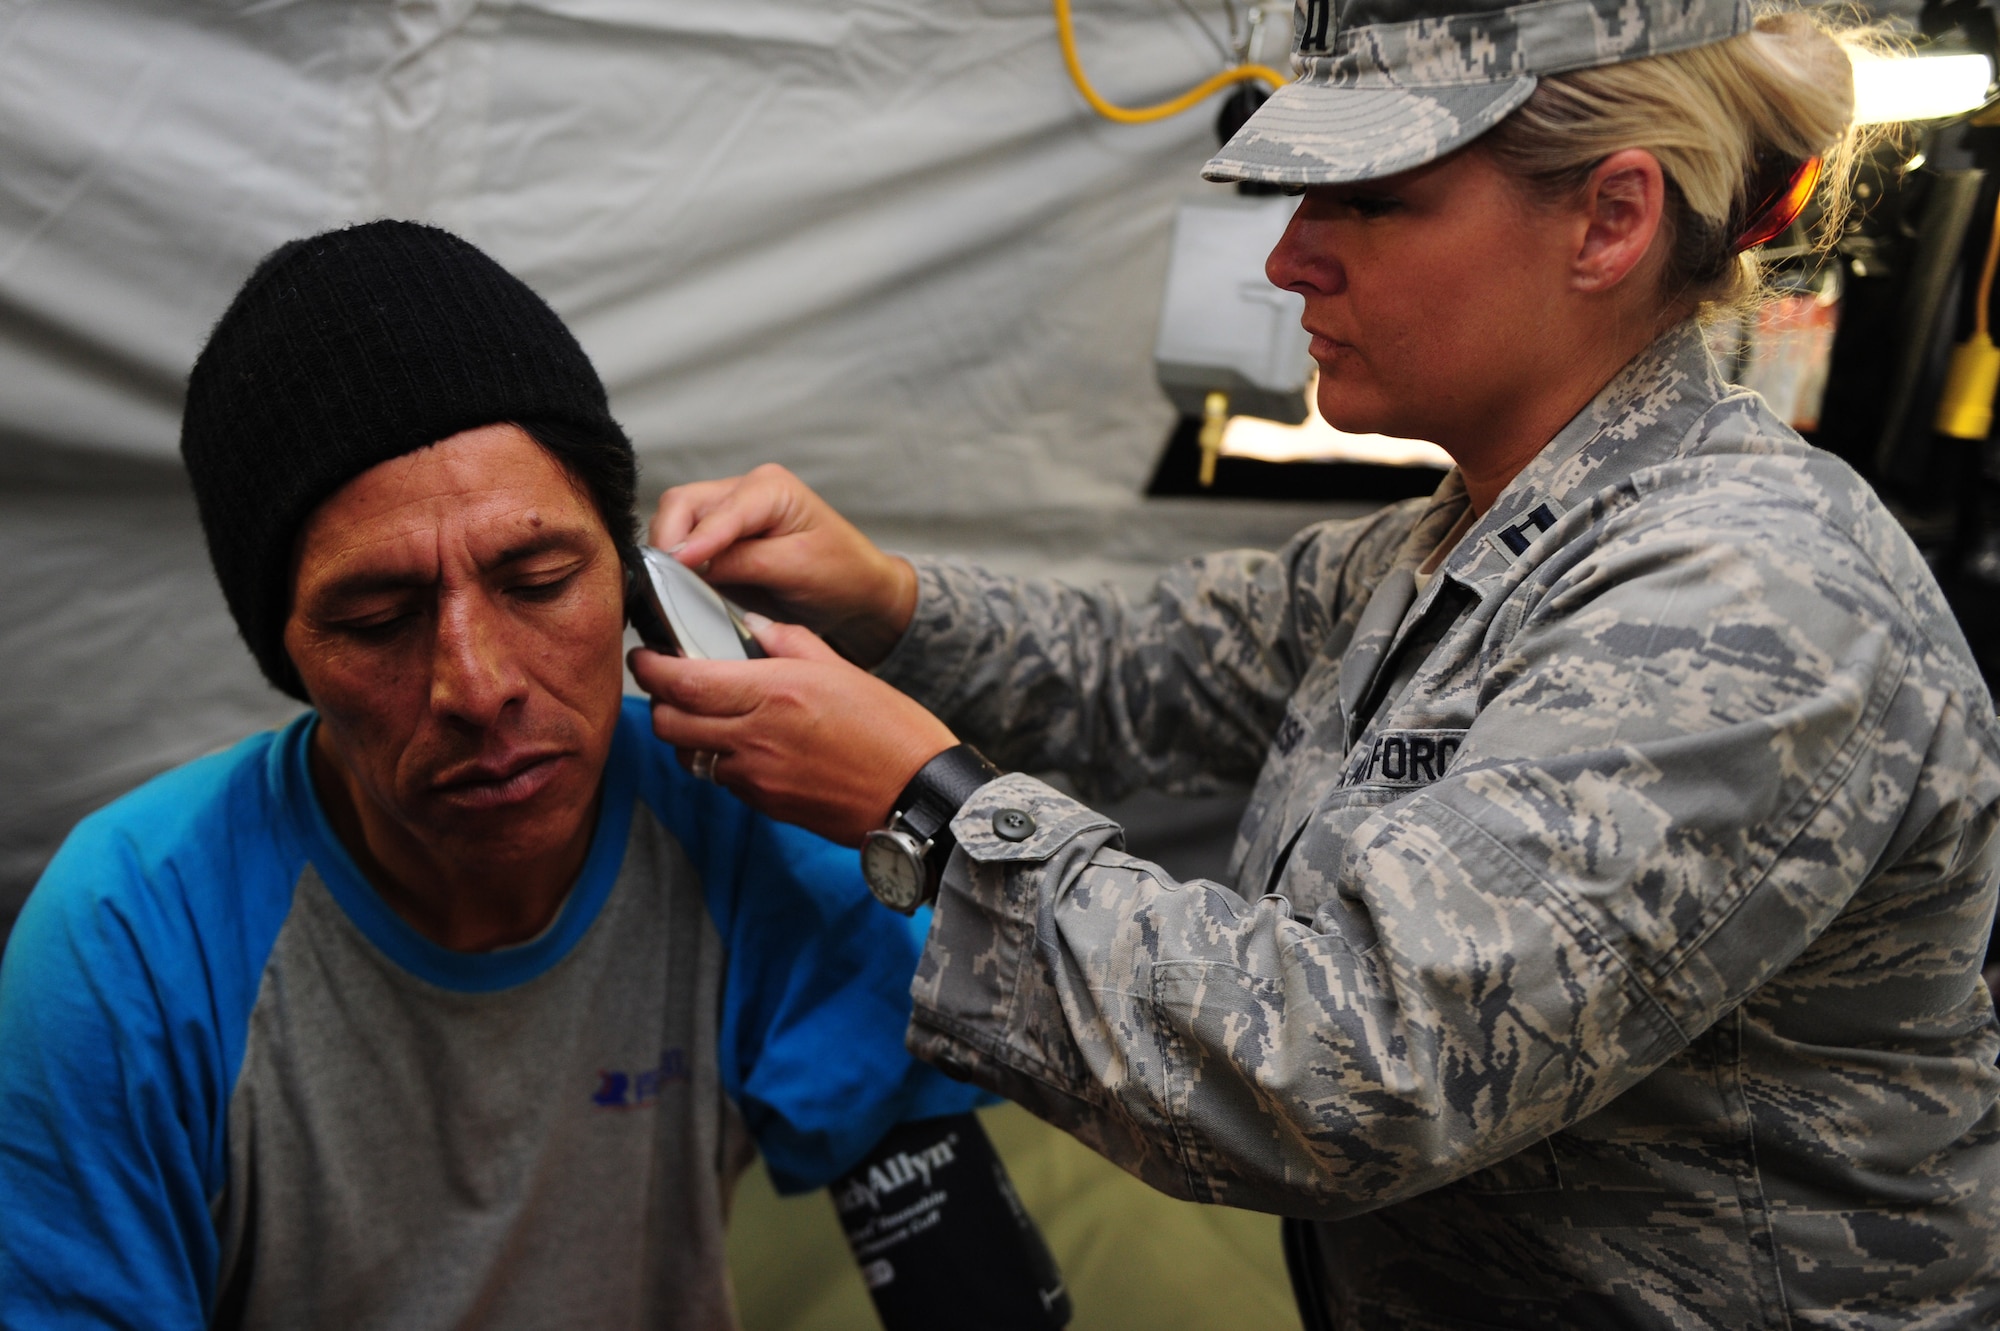 U.S. Air Force Capt. Jody Huss, right, checks the vital signs of a Peruvian patient at a health response team Expeditionary Medical Support mobile field hospital in Huancavelica, Peru, July 2, 2012, during New Horizons 2012. New Horizons is a U.S. Southern Command-sponsored annual series of joint humanitarian assistance exercises deploying U.S. military engineers, veterinarians, medics and other professions to Central and South American nations for training, construction projects and to provide humanitarian and medical services. (U.S. Air Force photo by Staff Sgt. Michael C. Zimmerman/Released)




